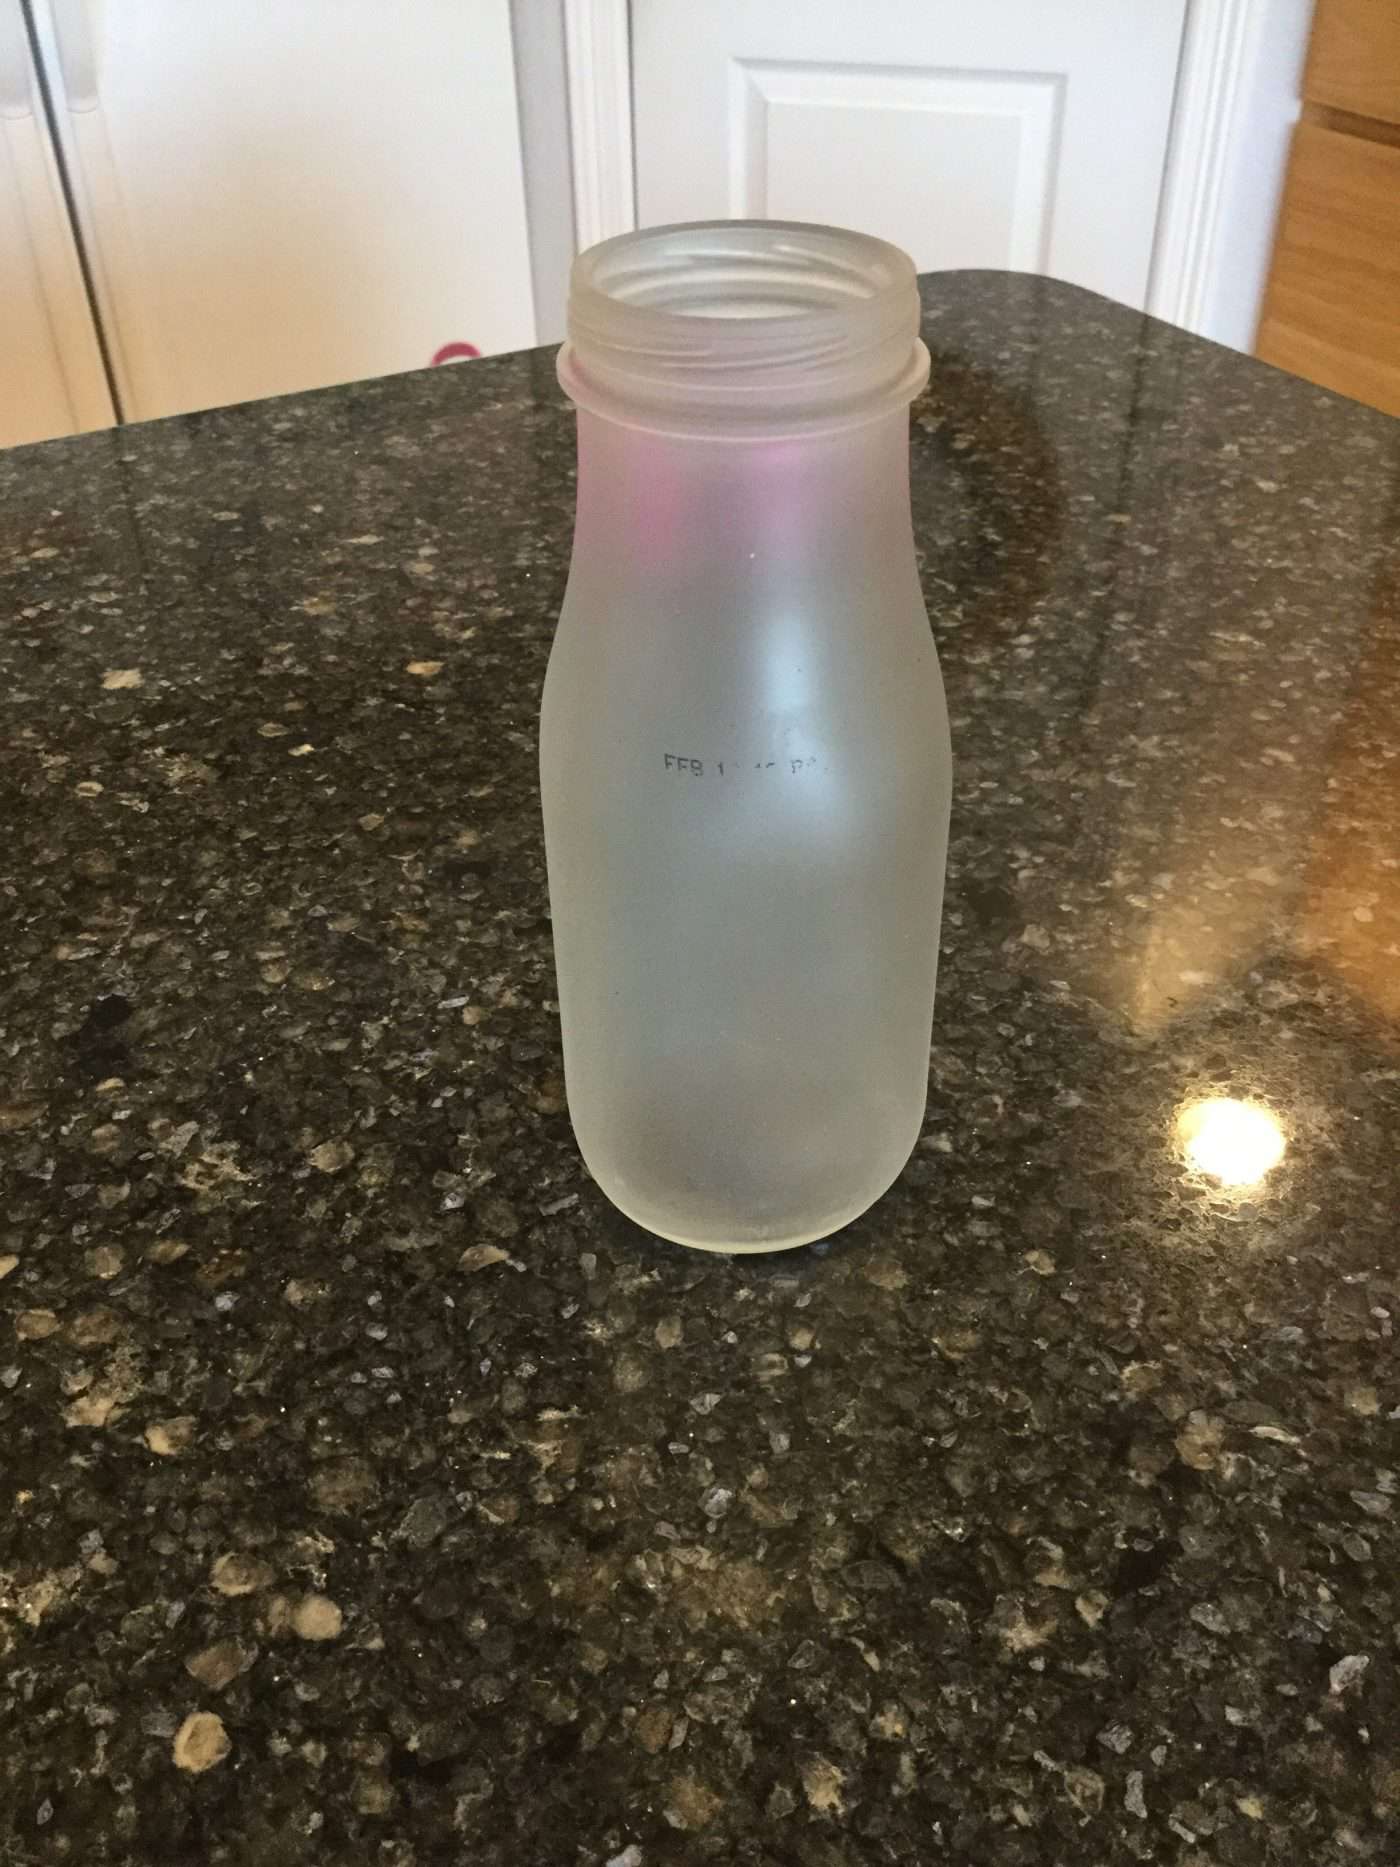 For my next jar, I frosted the glass.